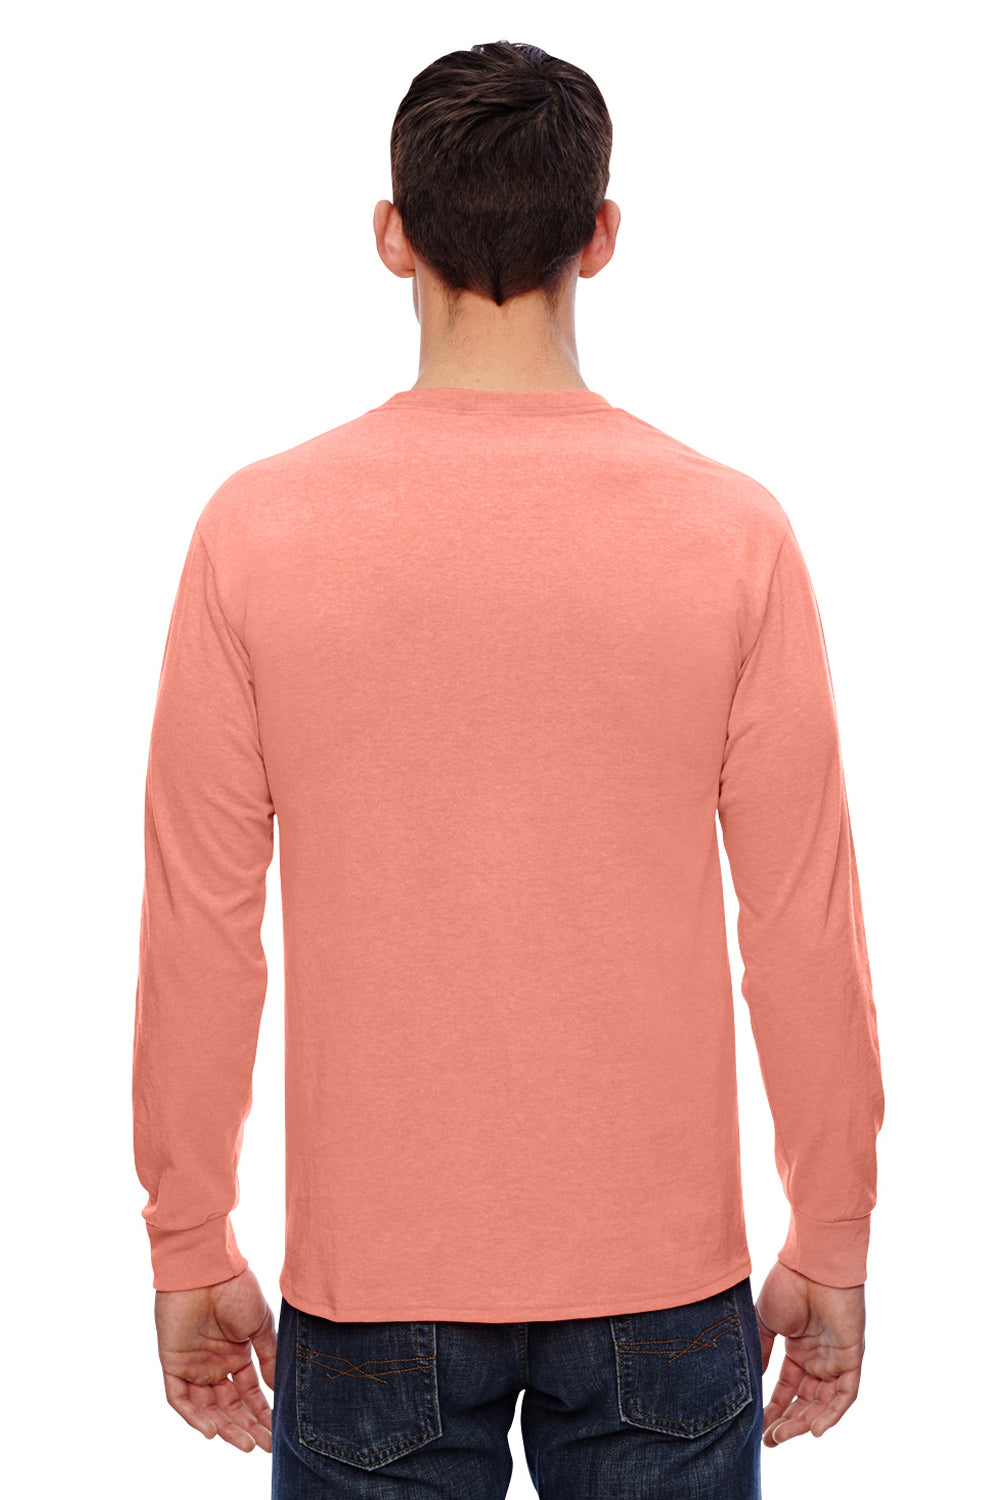 Fruit Of The Loom 4930 Mens HD Jersey Long Sleeve Crewneck T-Shirt Heather Coral Red Back